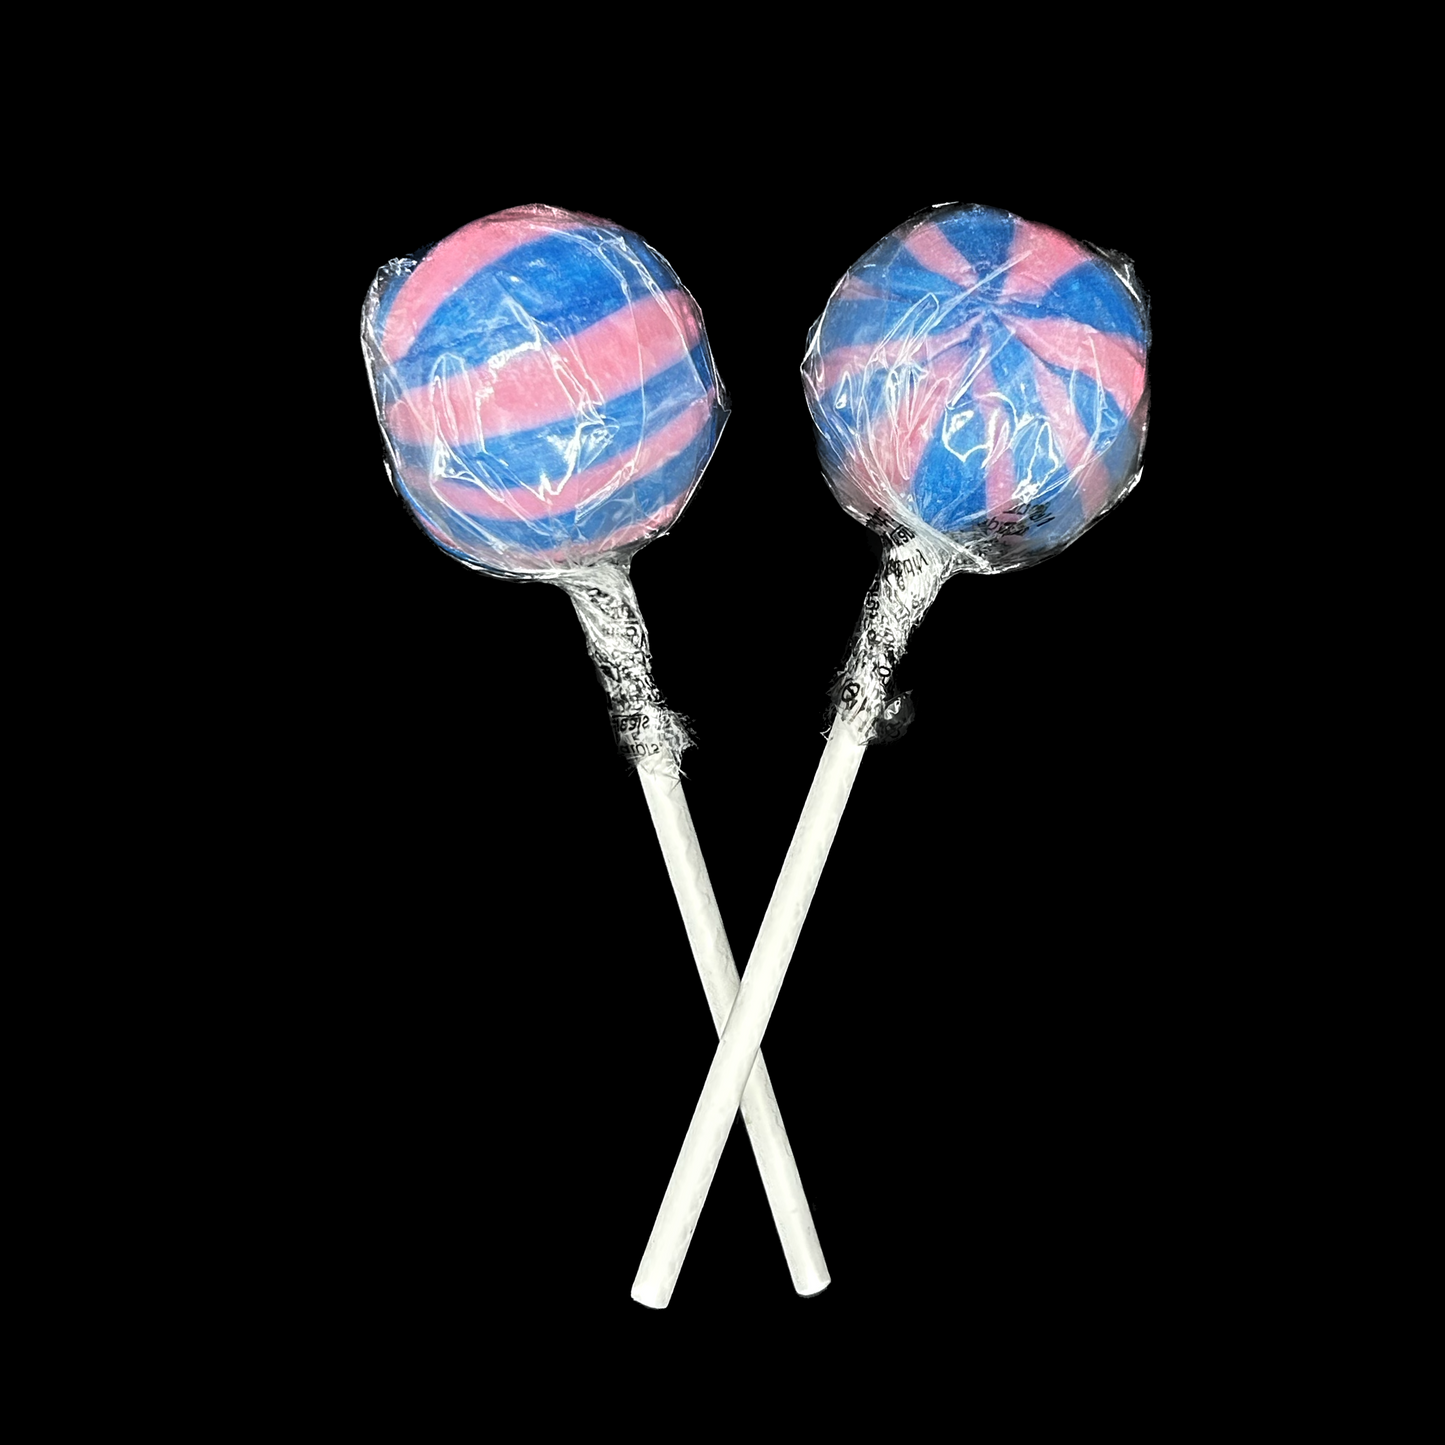 Crazy Candy Factory Bubblegum Flavoured Lolly